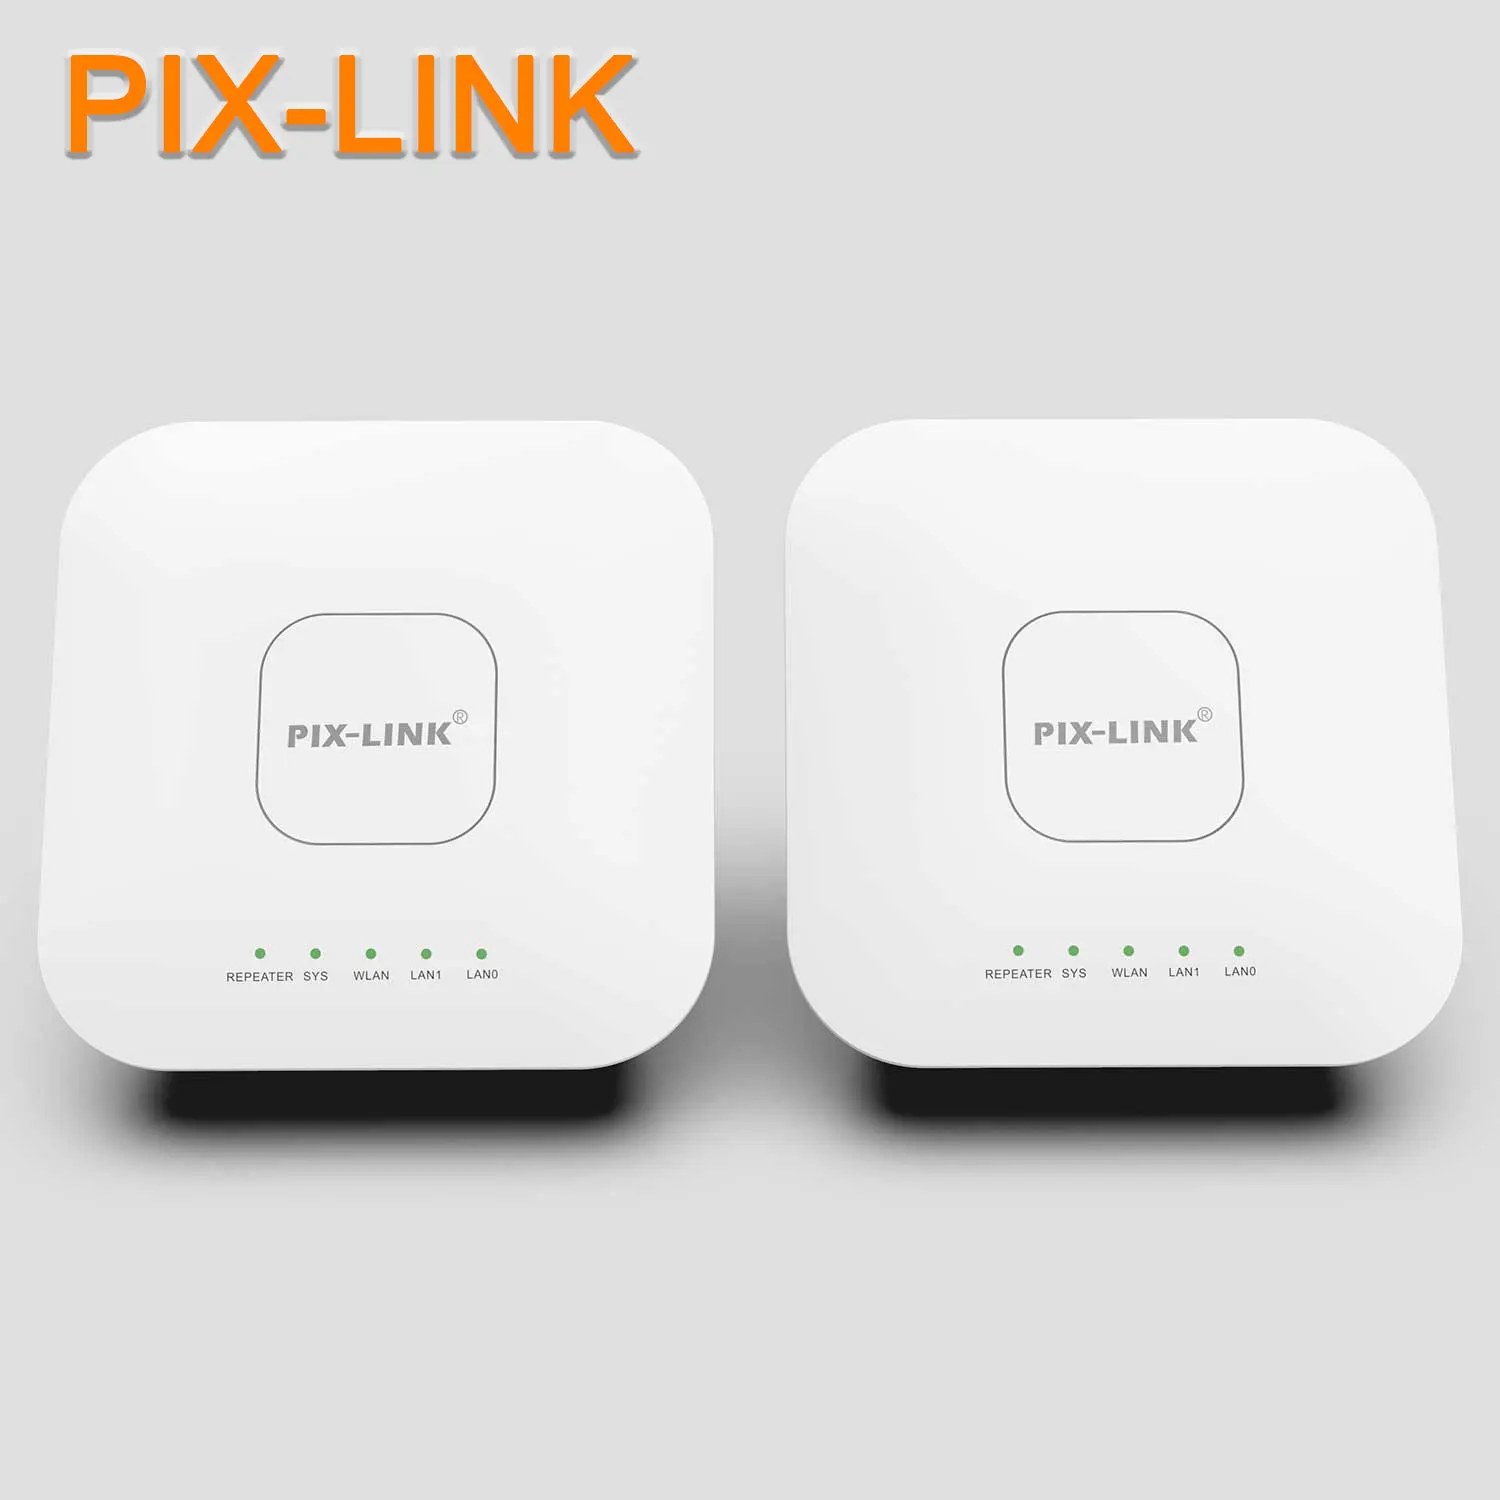 

O6 10KM 5GHz 11ac 433Mbps Outdoor CPE Wireless WiFi Repeater Extender Router AP Access Point WiFi Bridge with POE Adapter